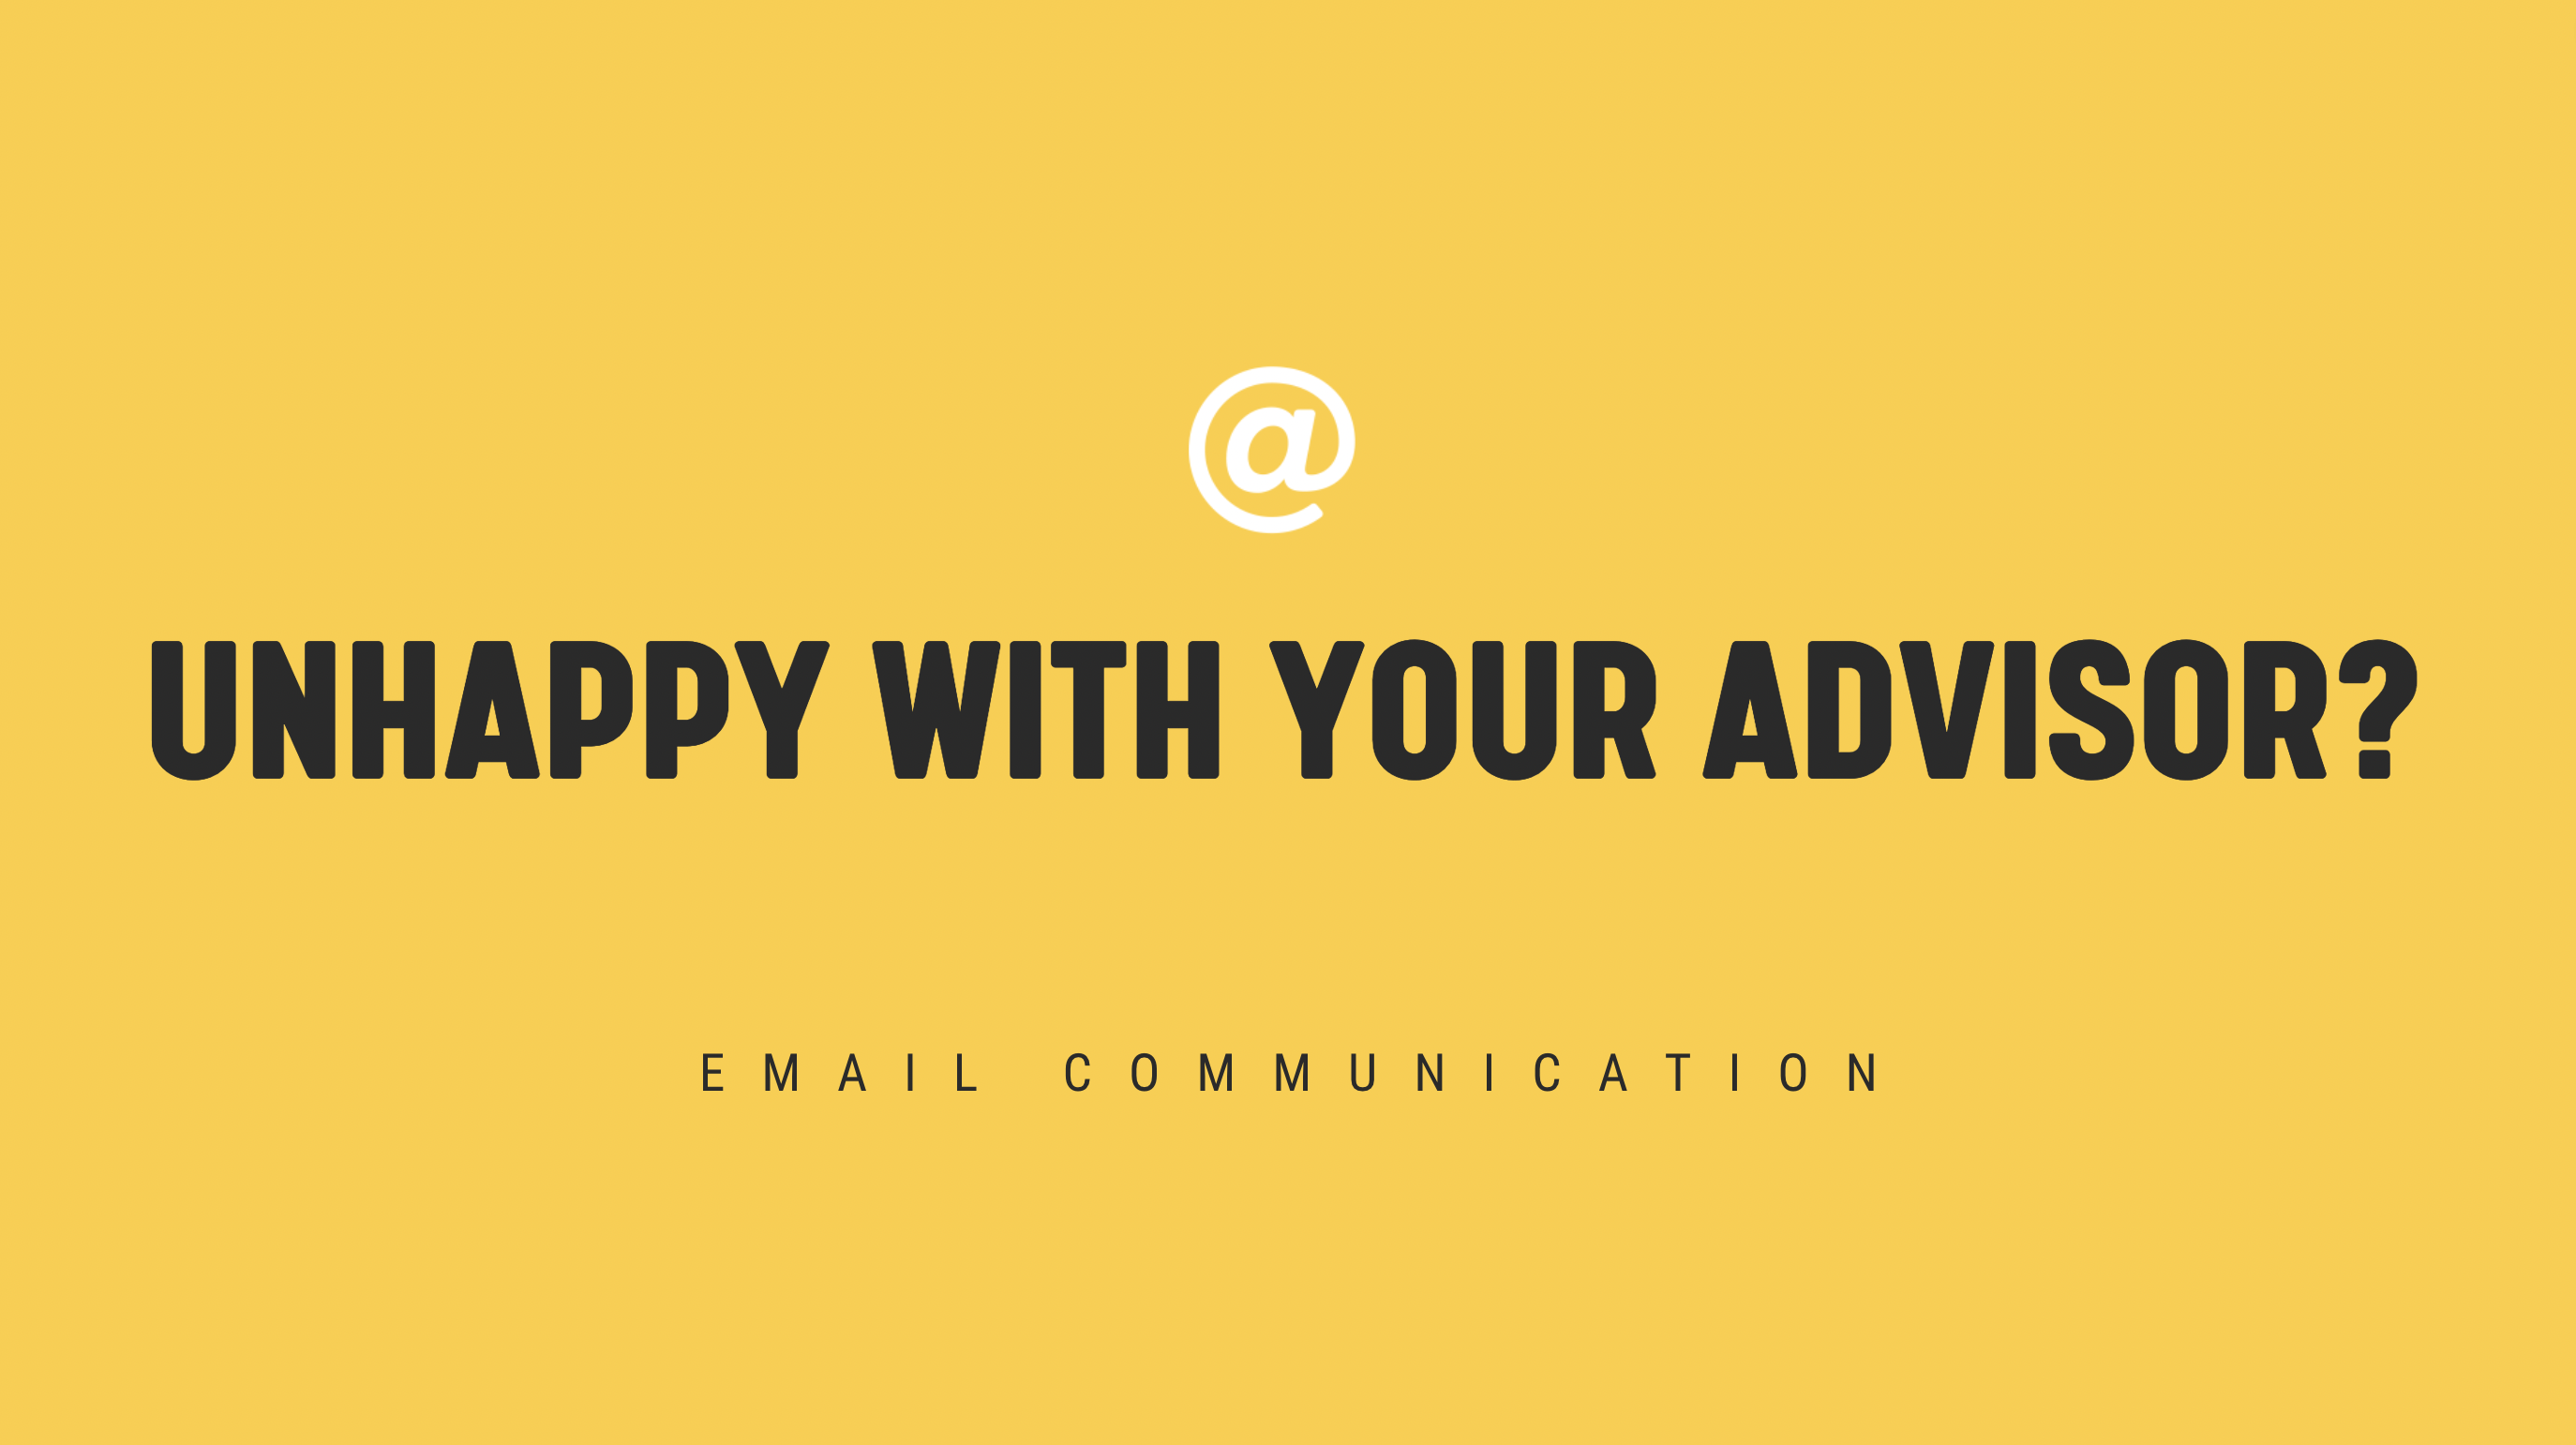 [NEW] Unhappy With Your Advisor? - Single Email